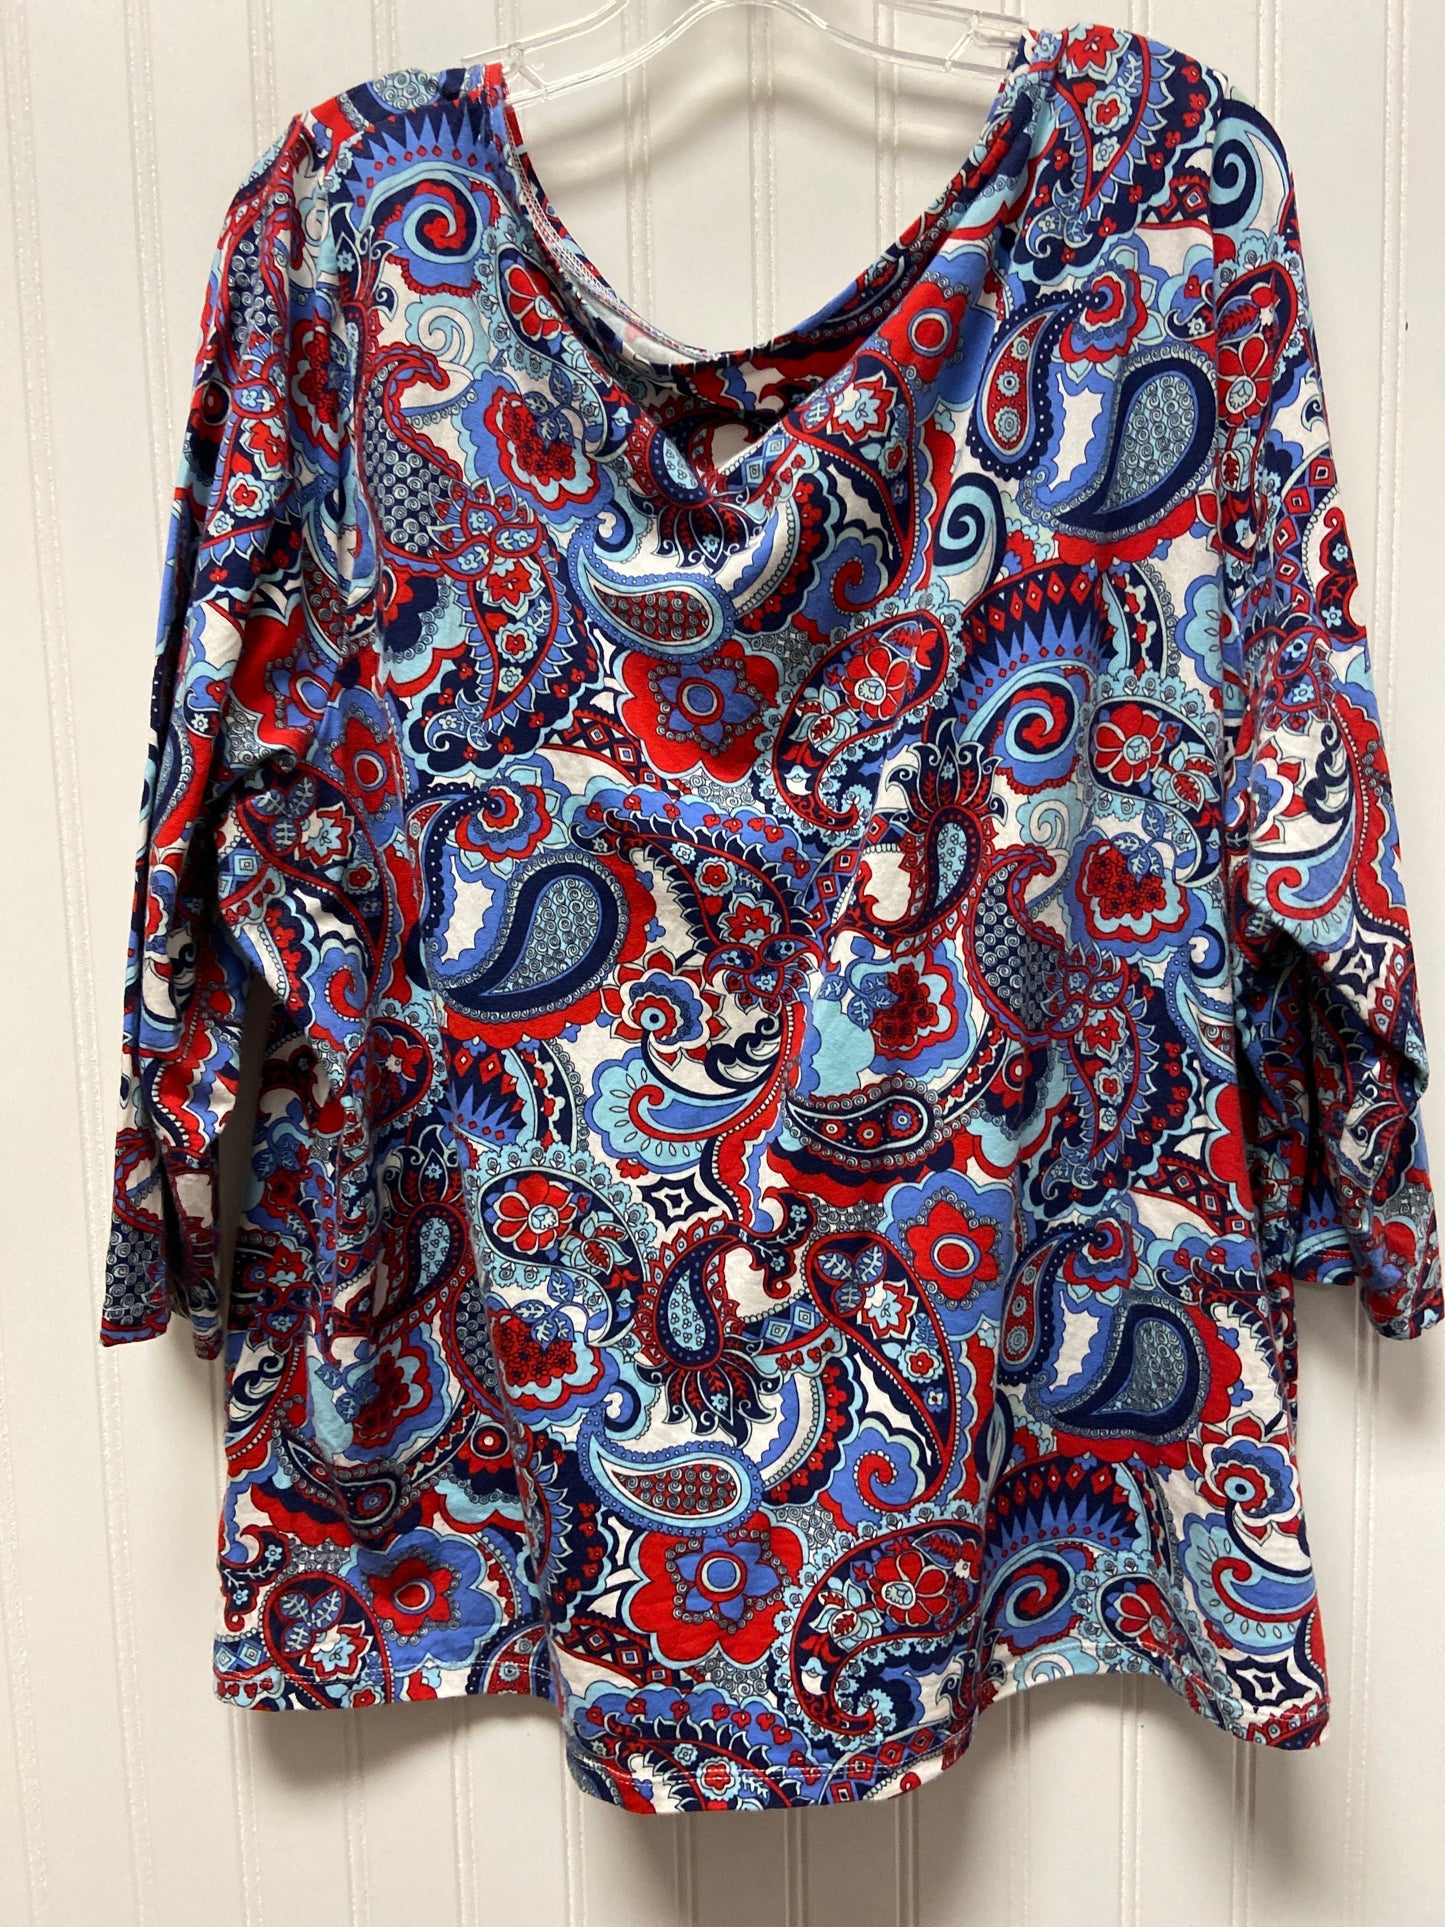 Blue & Red & White Top Long Sleeve Talbots, Size 3x